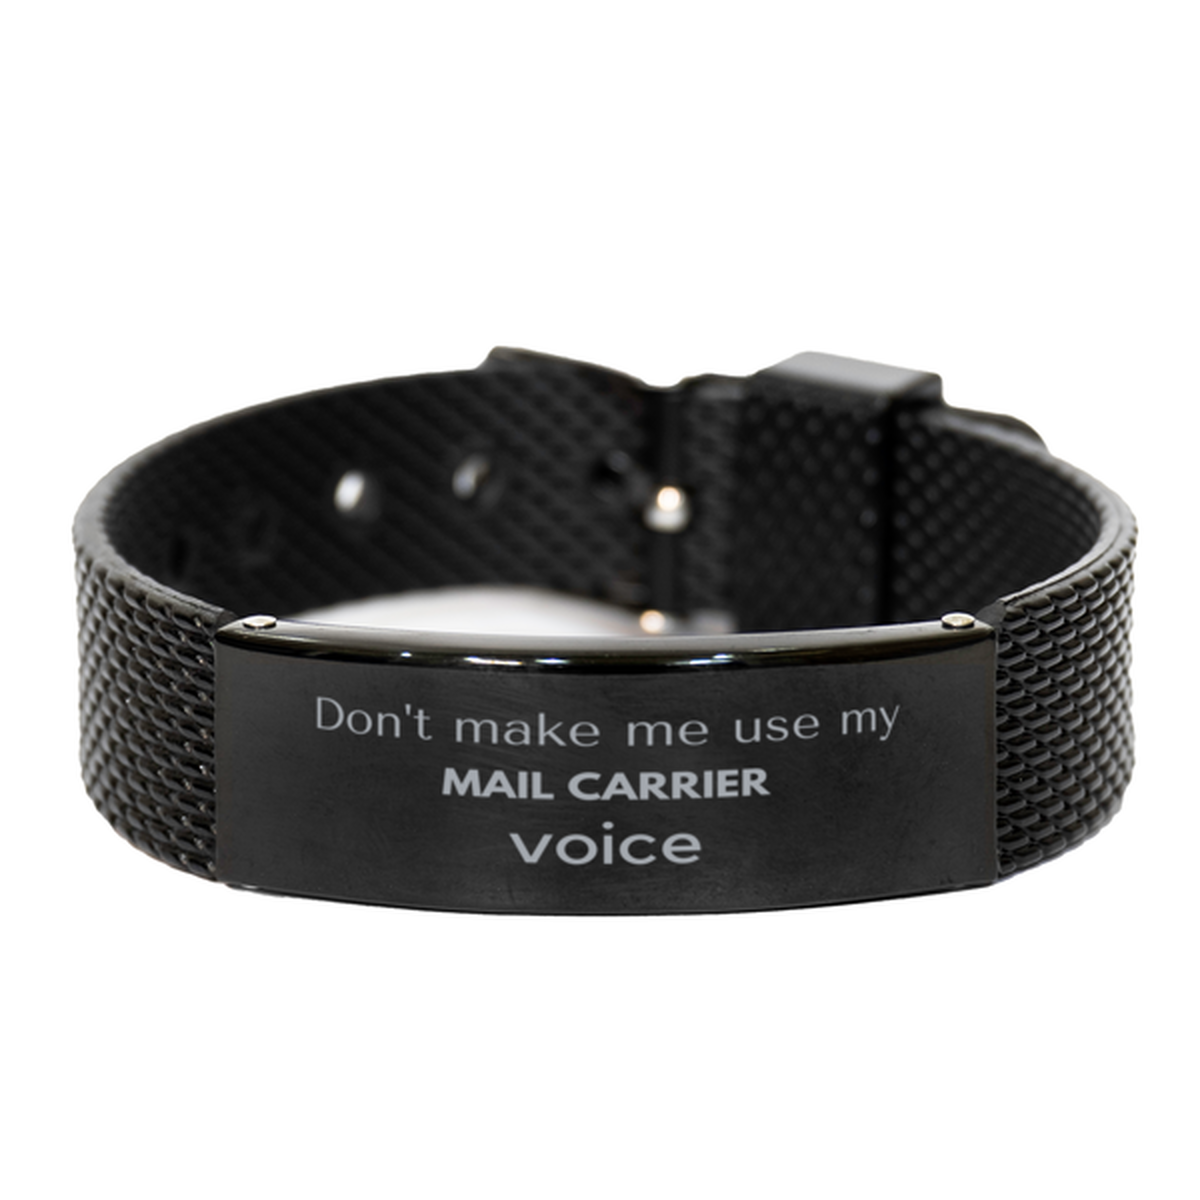 Don't make me use my Mail Carrier voice, Sarcasm Mail Carrier Gifts, Christmas Mail Carrier Black Shark Mesh Bracelet Birthday Unique Gifts For Mail Carrier Coworkers, Men, Women, Colleague, Friends